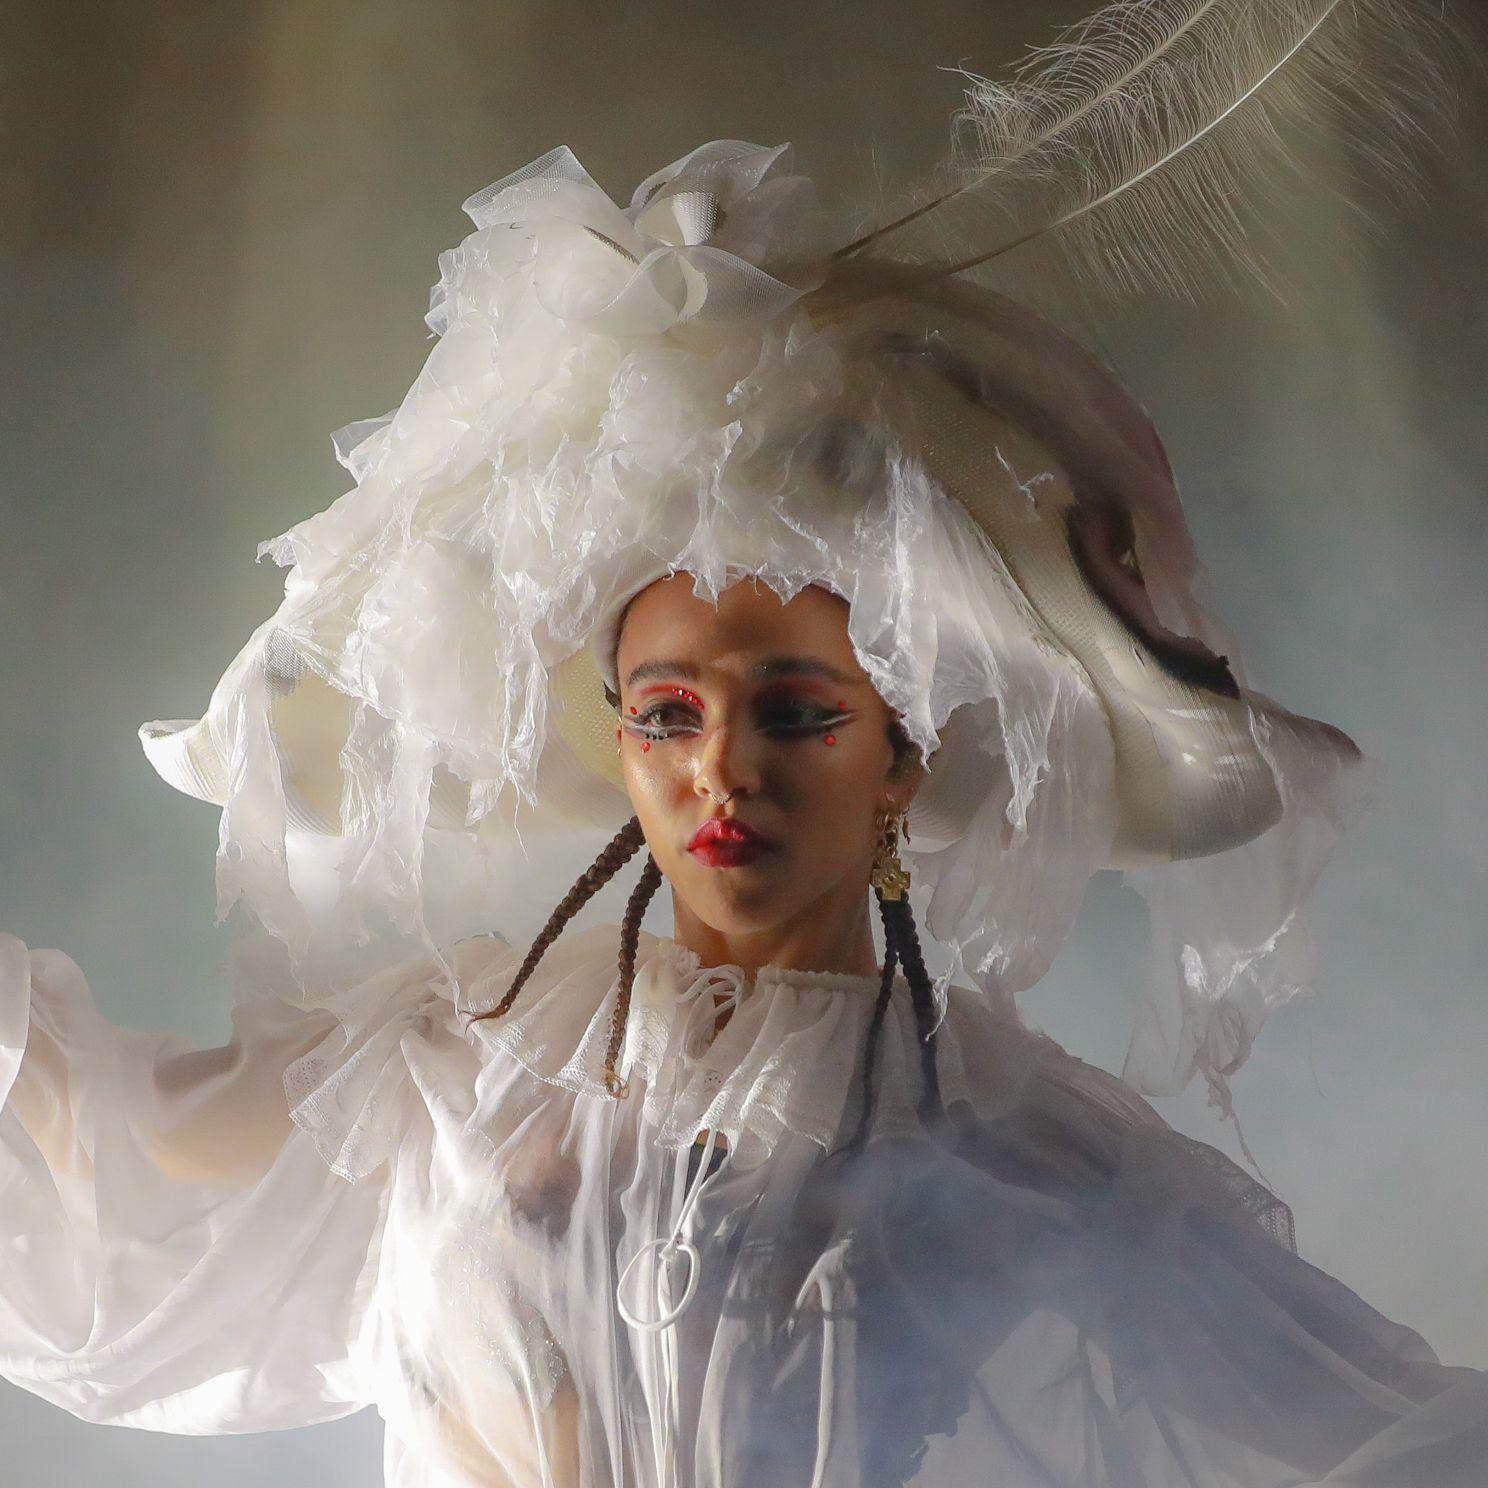 FKA twigs's Heartbreak Takes the Stage at Stunning Magdalene